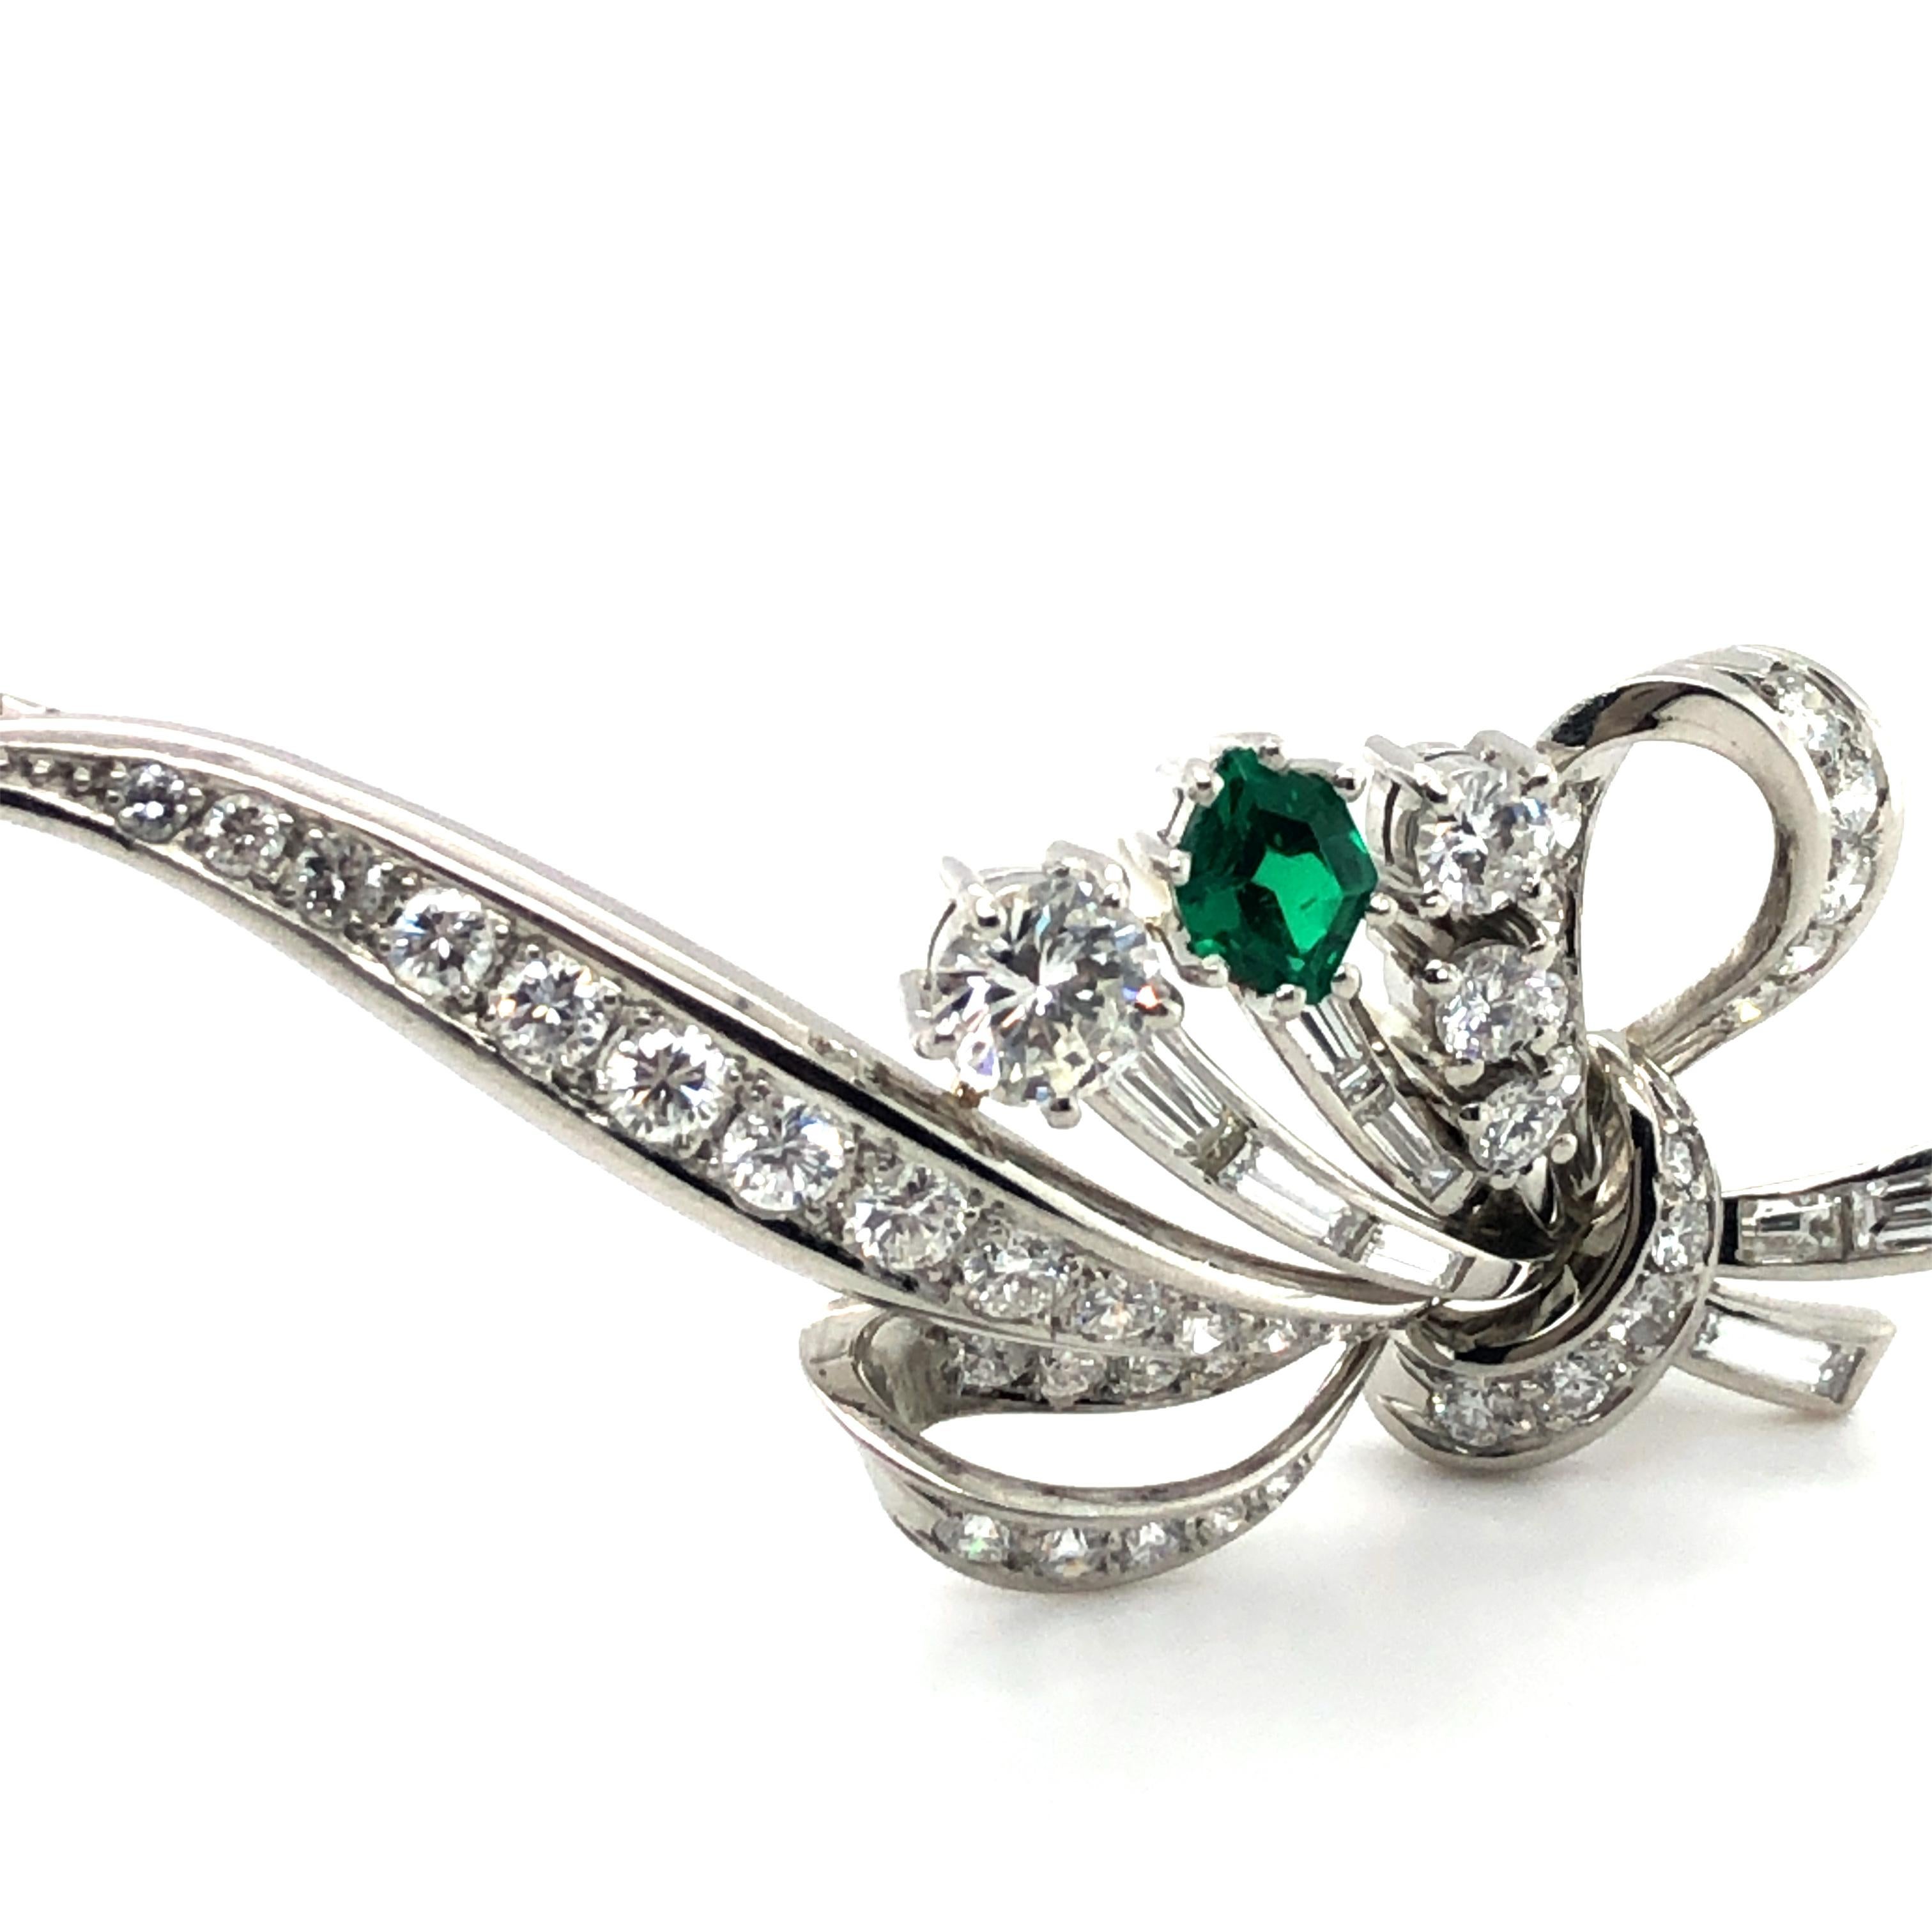 Elegant Meister Diamond Brooch with Emerald in Platinum 950 In Excellent Condition For Sale In Lucerne, CH